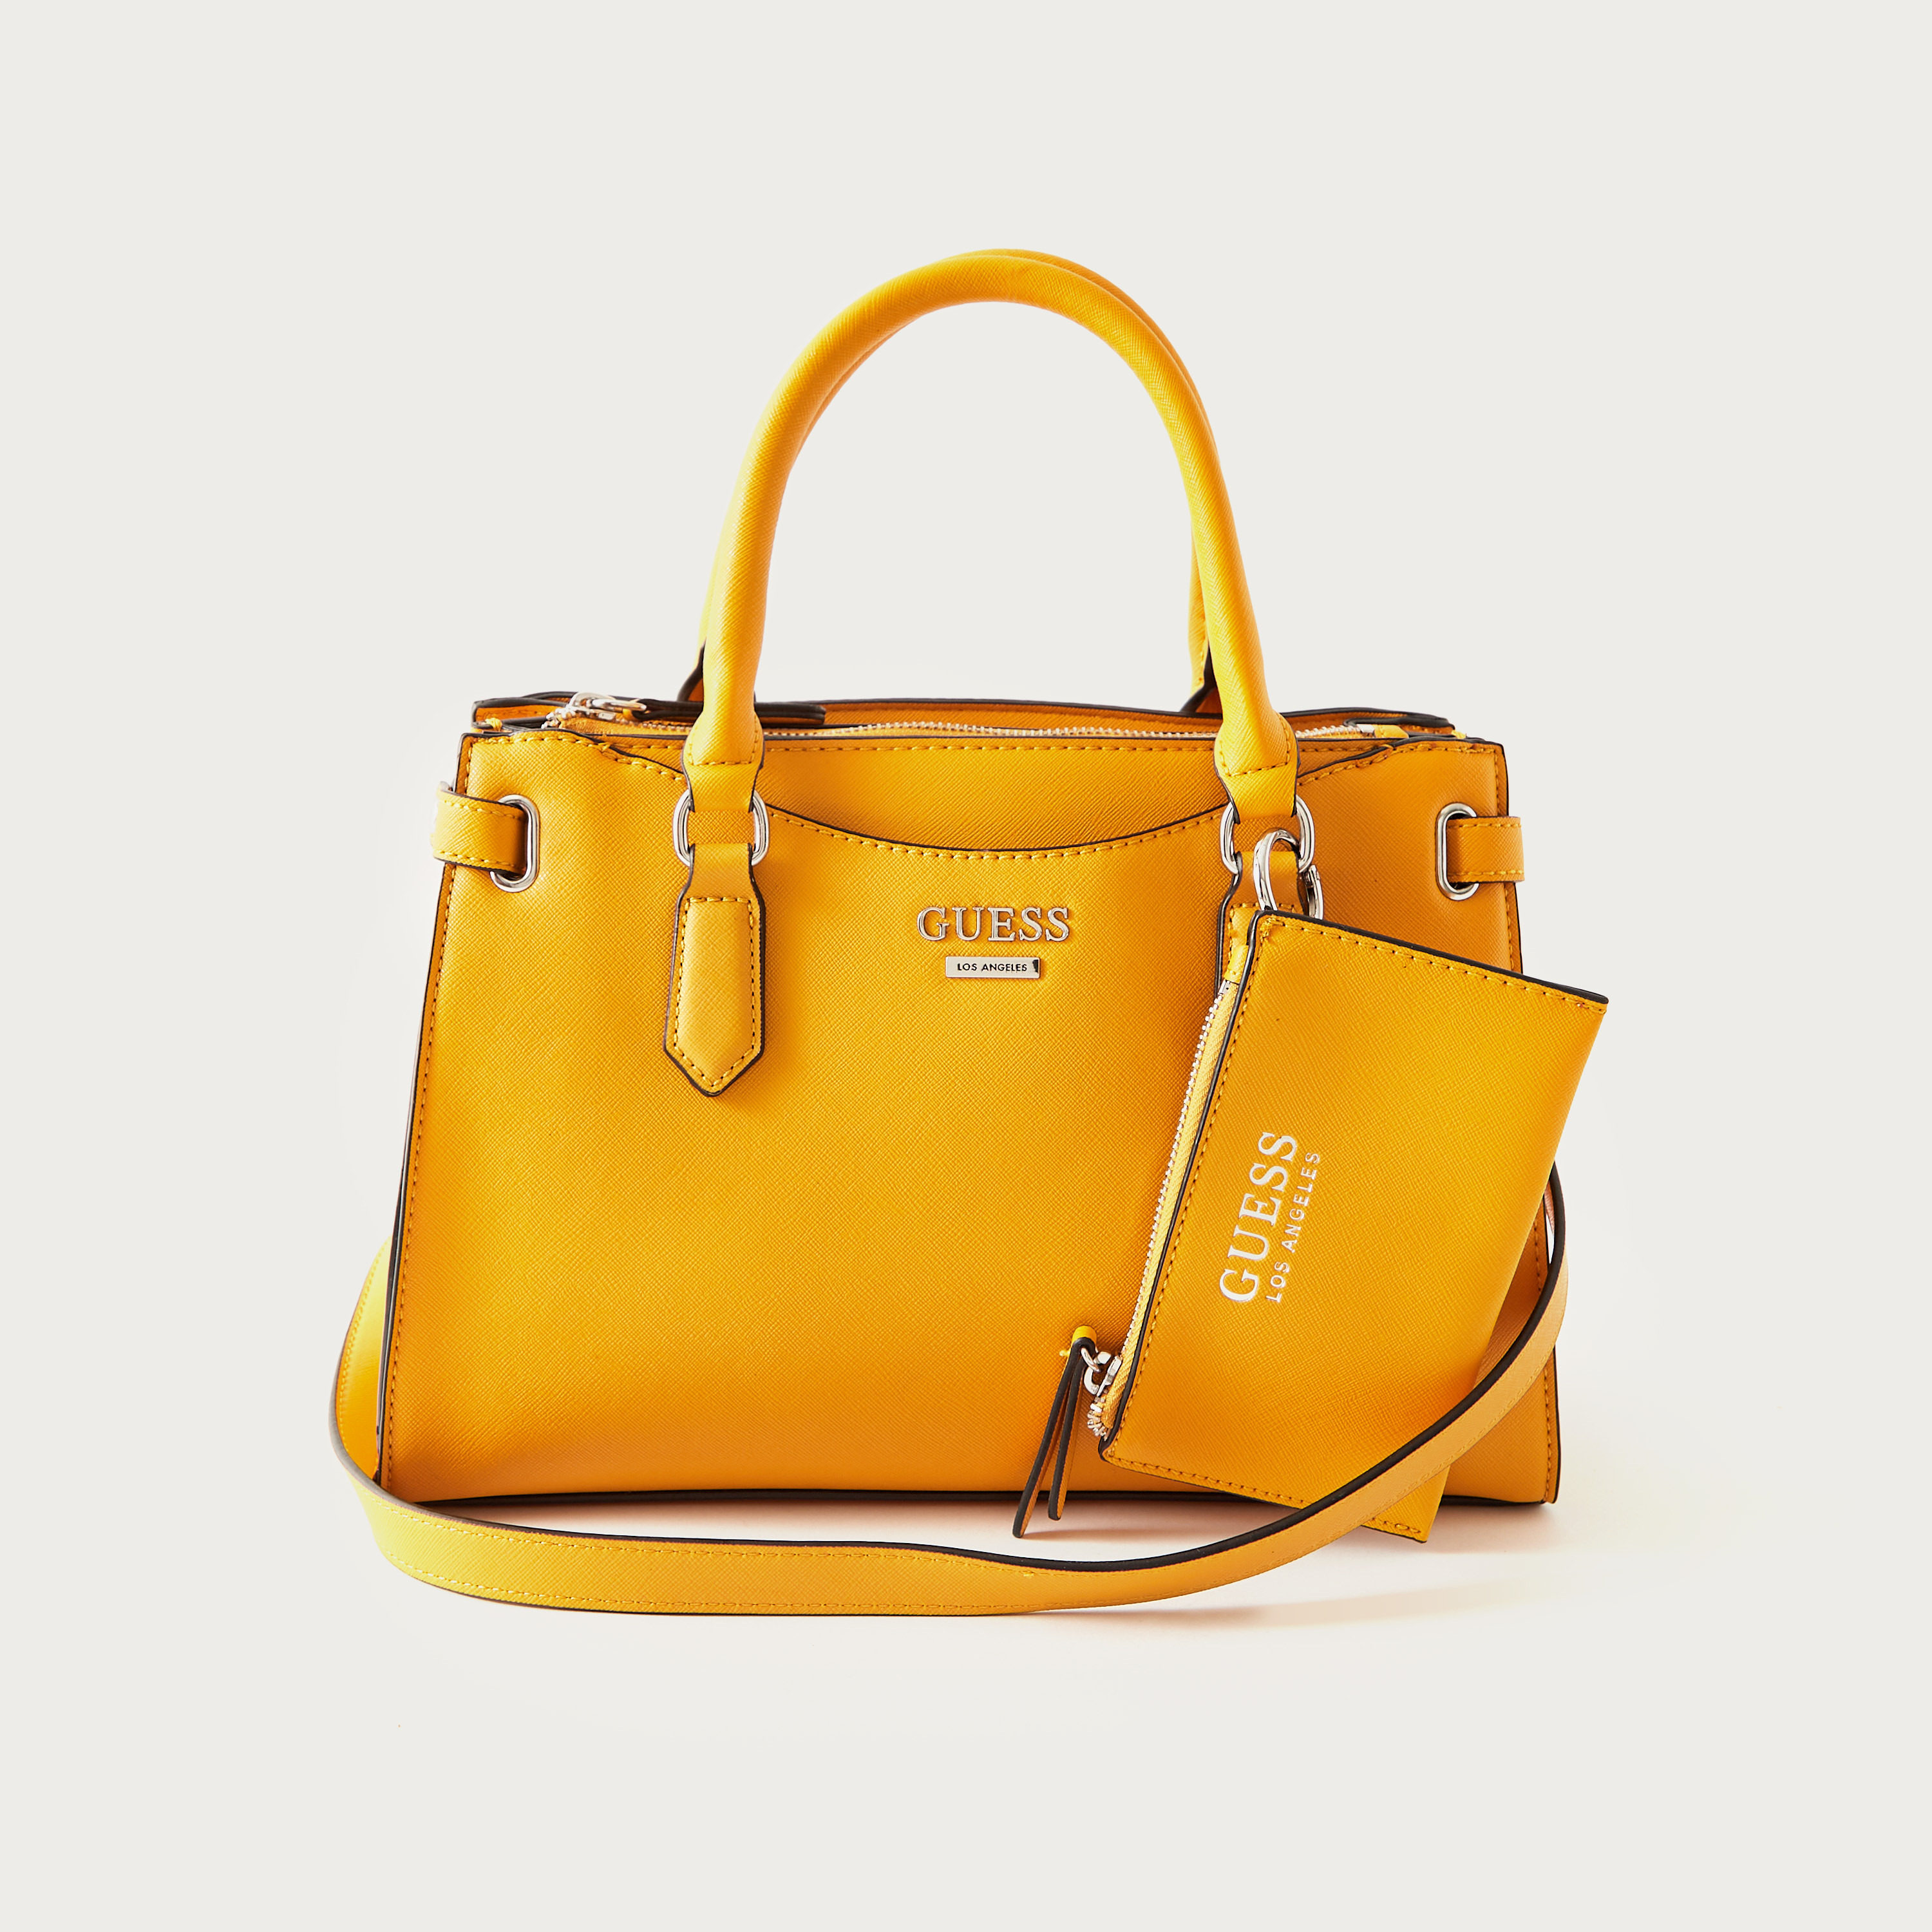 Buy Women's Guess Tote Bag Online | Centrepoint Qatar